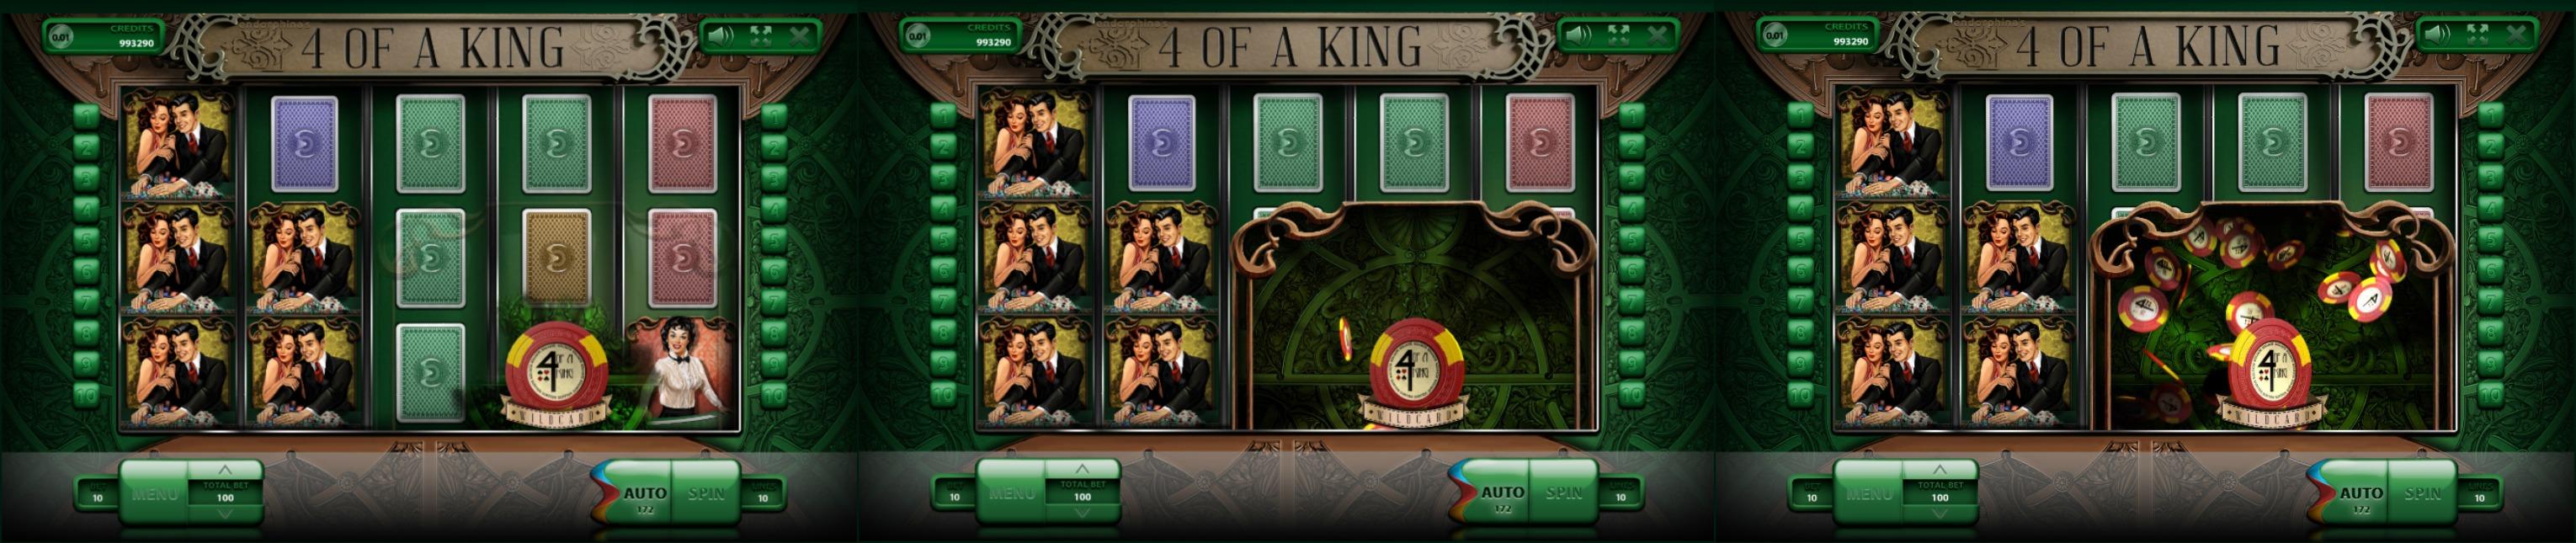 4 of a King SoftGamings